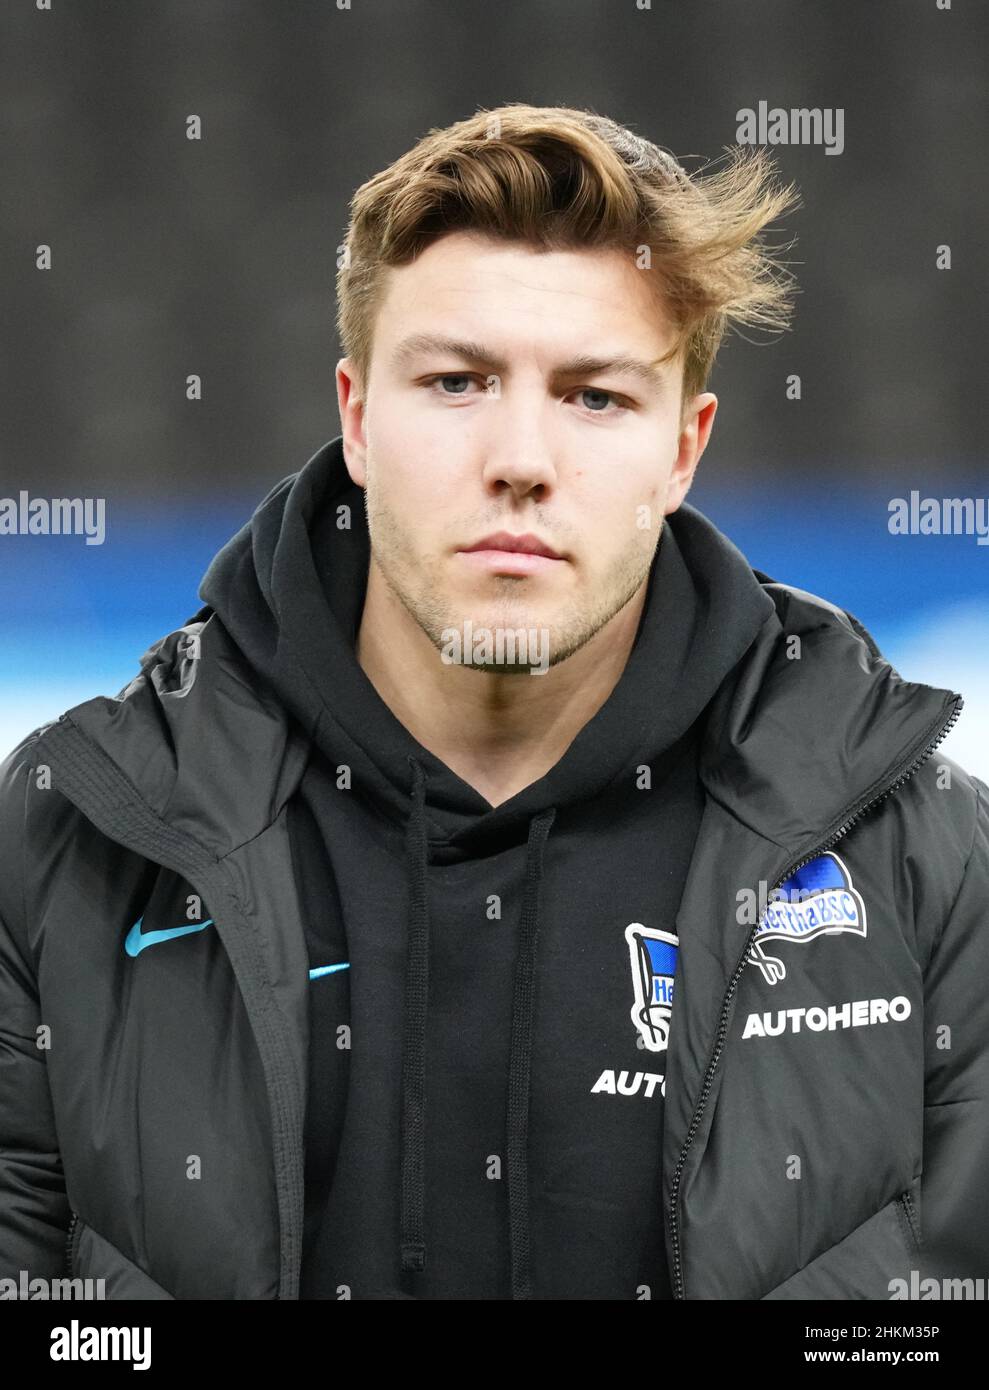 Berlin, Germany. 04th Feb, 2022. Soccer: Bundesliga, Hertha BSC - VfL Bochum, Matchday 21 at the Olympiastadion. Hertha's Fredrik Andre Bjorkan before the game. Credit: Soeren Stache/dpa-Zentralbild/dpa - IMPORTANT NOTE: In accordance with the requirements of the DFL Deutsche Fußball Liga and the DFB Deutscher Fußball-Bund, it is prohibited to use or have used photographs taken in the stadium and/or of the match in the form of sequence pictures and/or video-like photo series./dpa/Alamy Live News Stock Photo